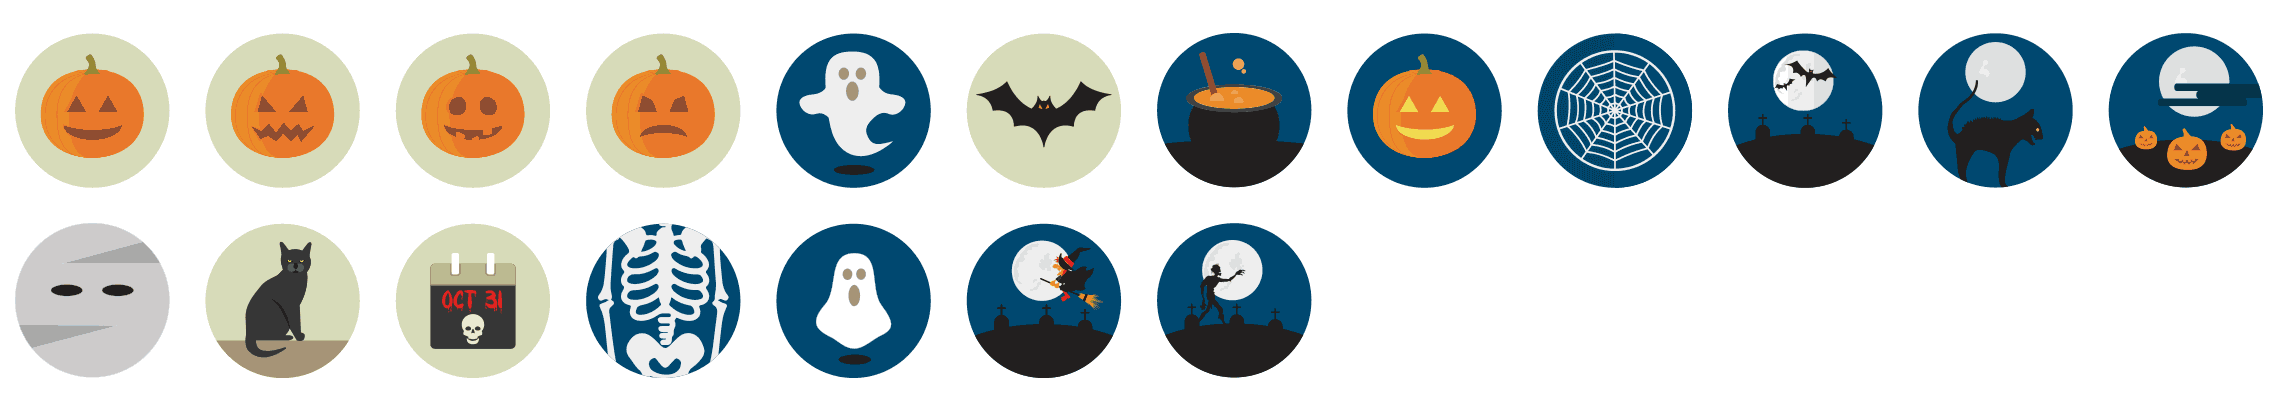 halloween-flat-icons-vol-1-preview